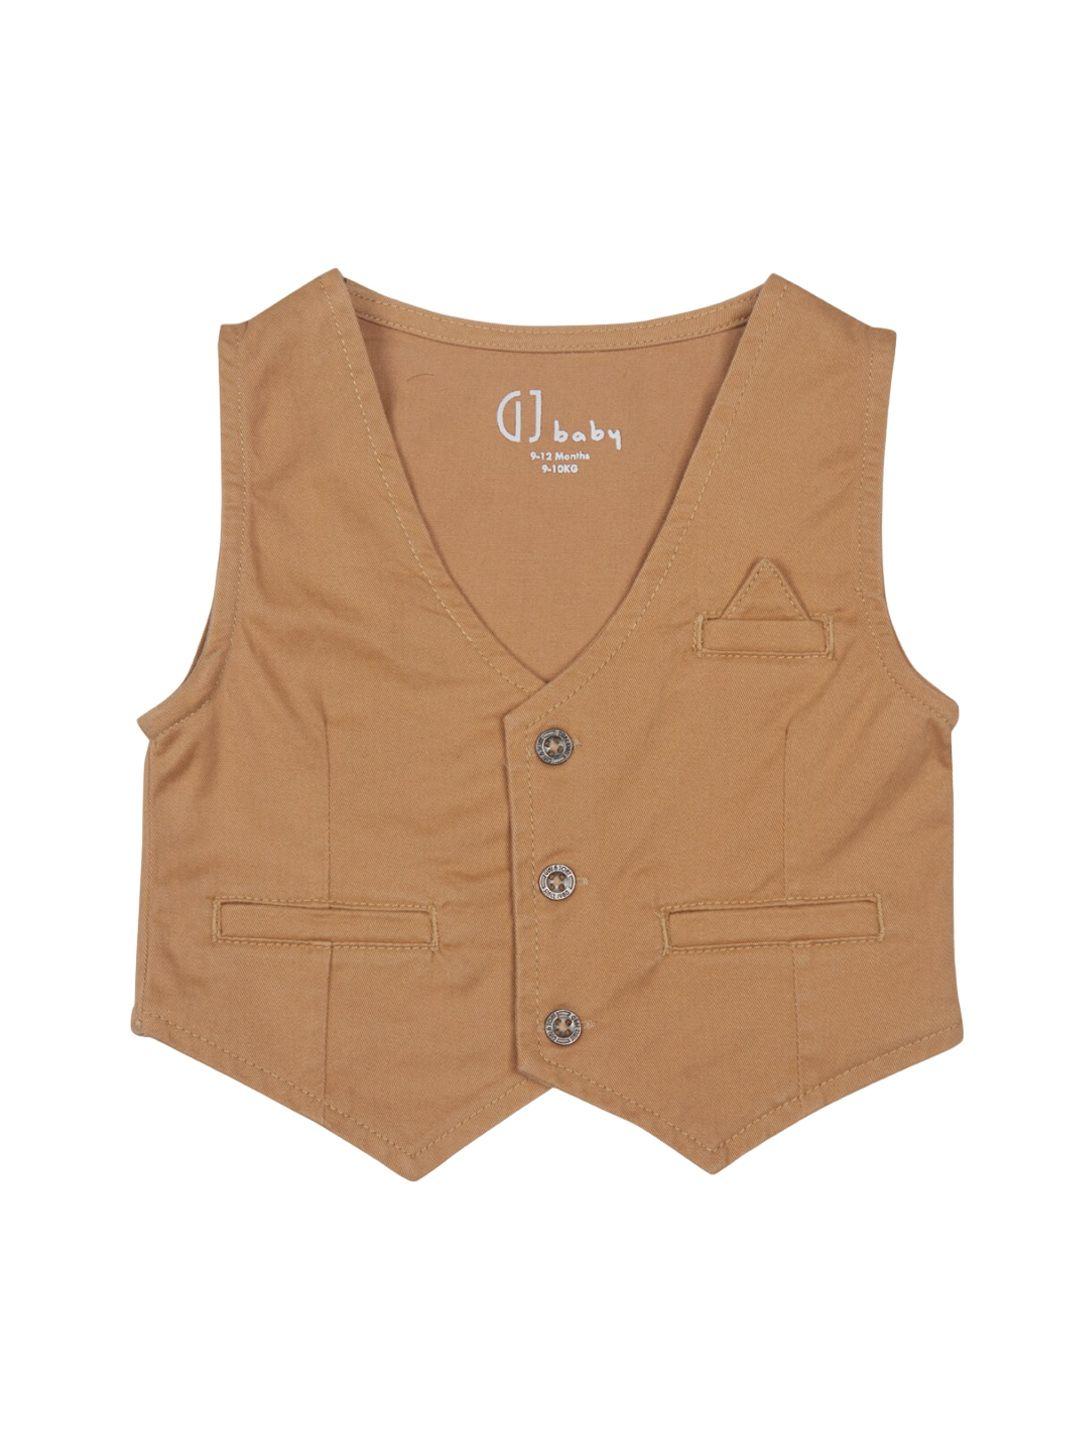 gj-baby-boys-brown-tailored-jacket-with-embroidered